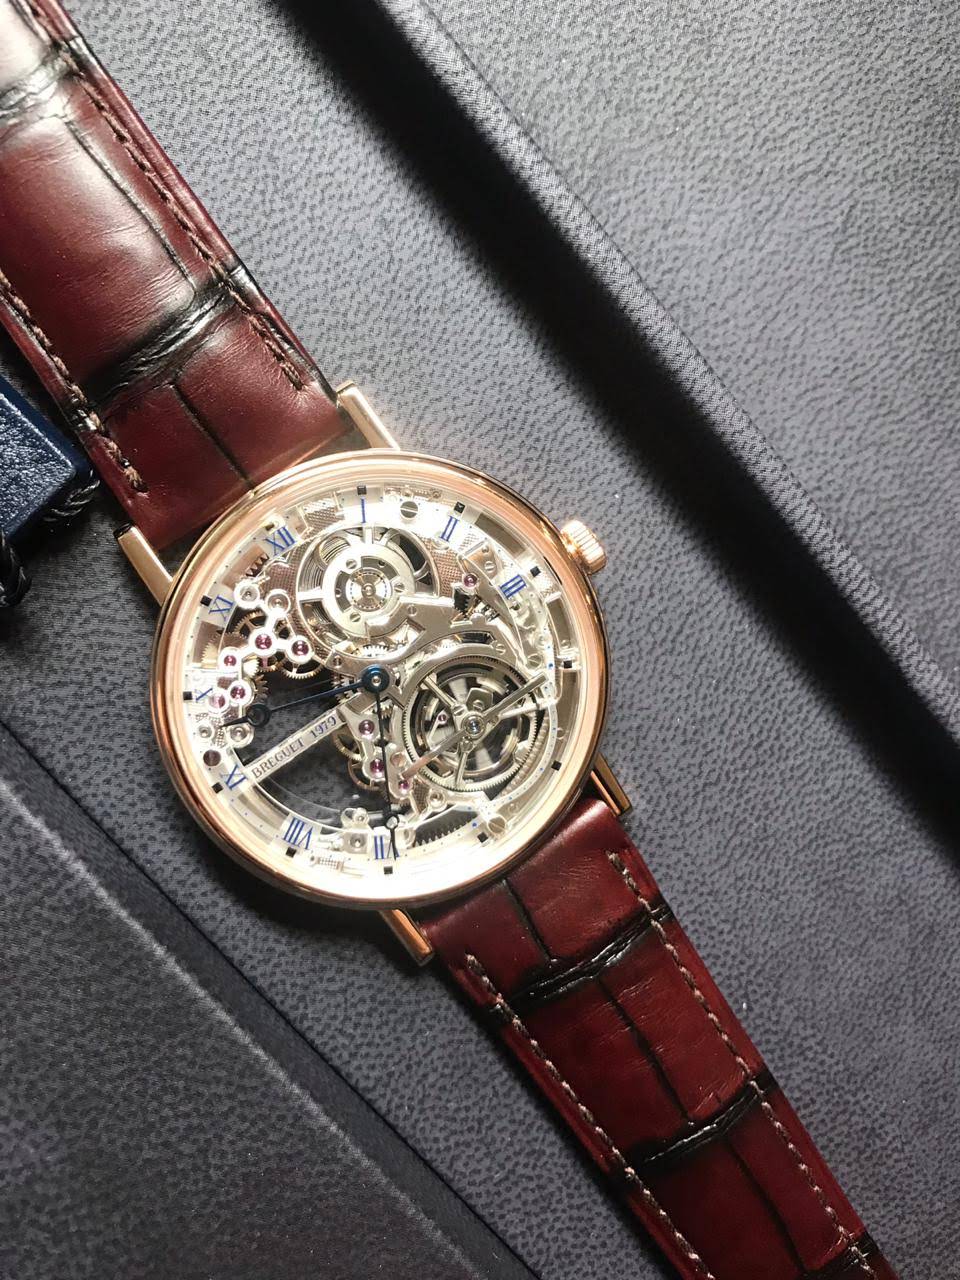 Breguet's biggest novelty this year – the Classique “Grande Complication” Tourbillon Squelette 5935 equipped with the ultra thin 351 automatic movement with a peripheral rotor. 